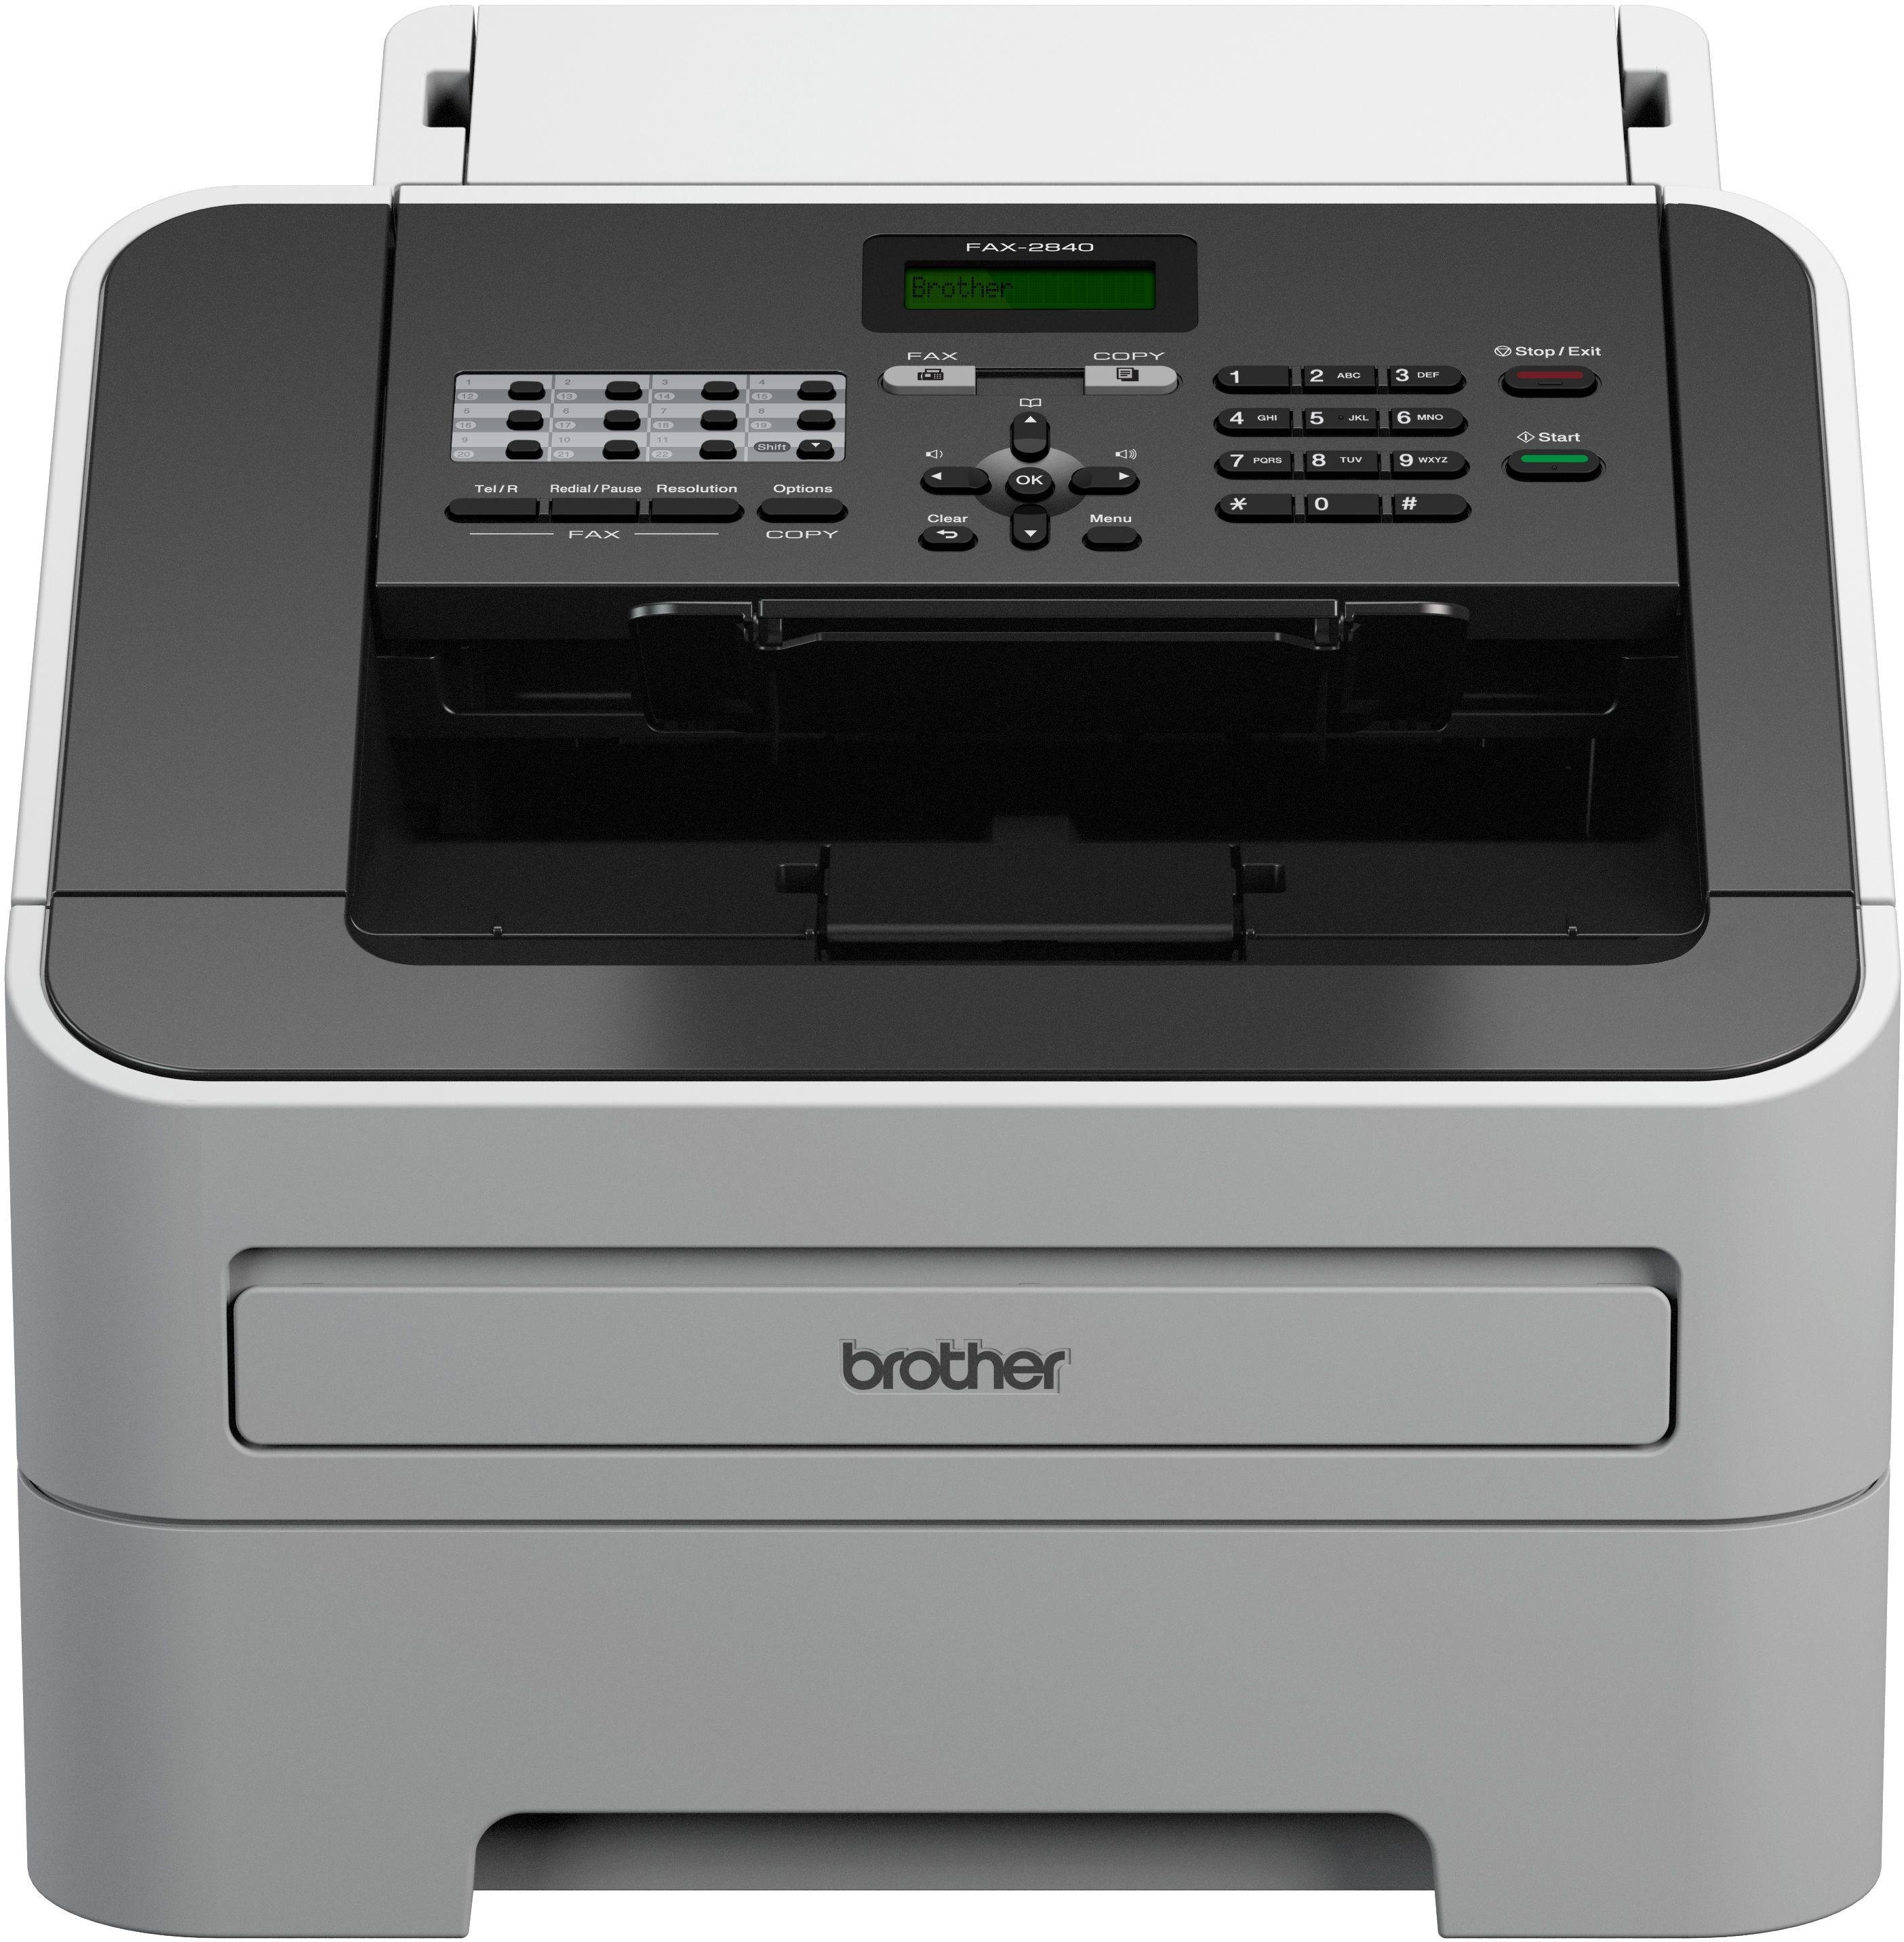 Brother FAX2840 Mono Laser Fax